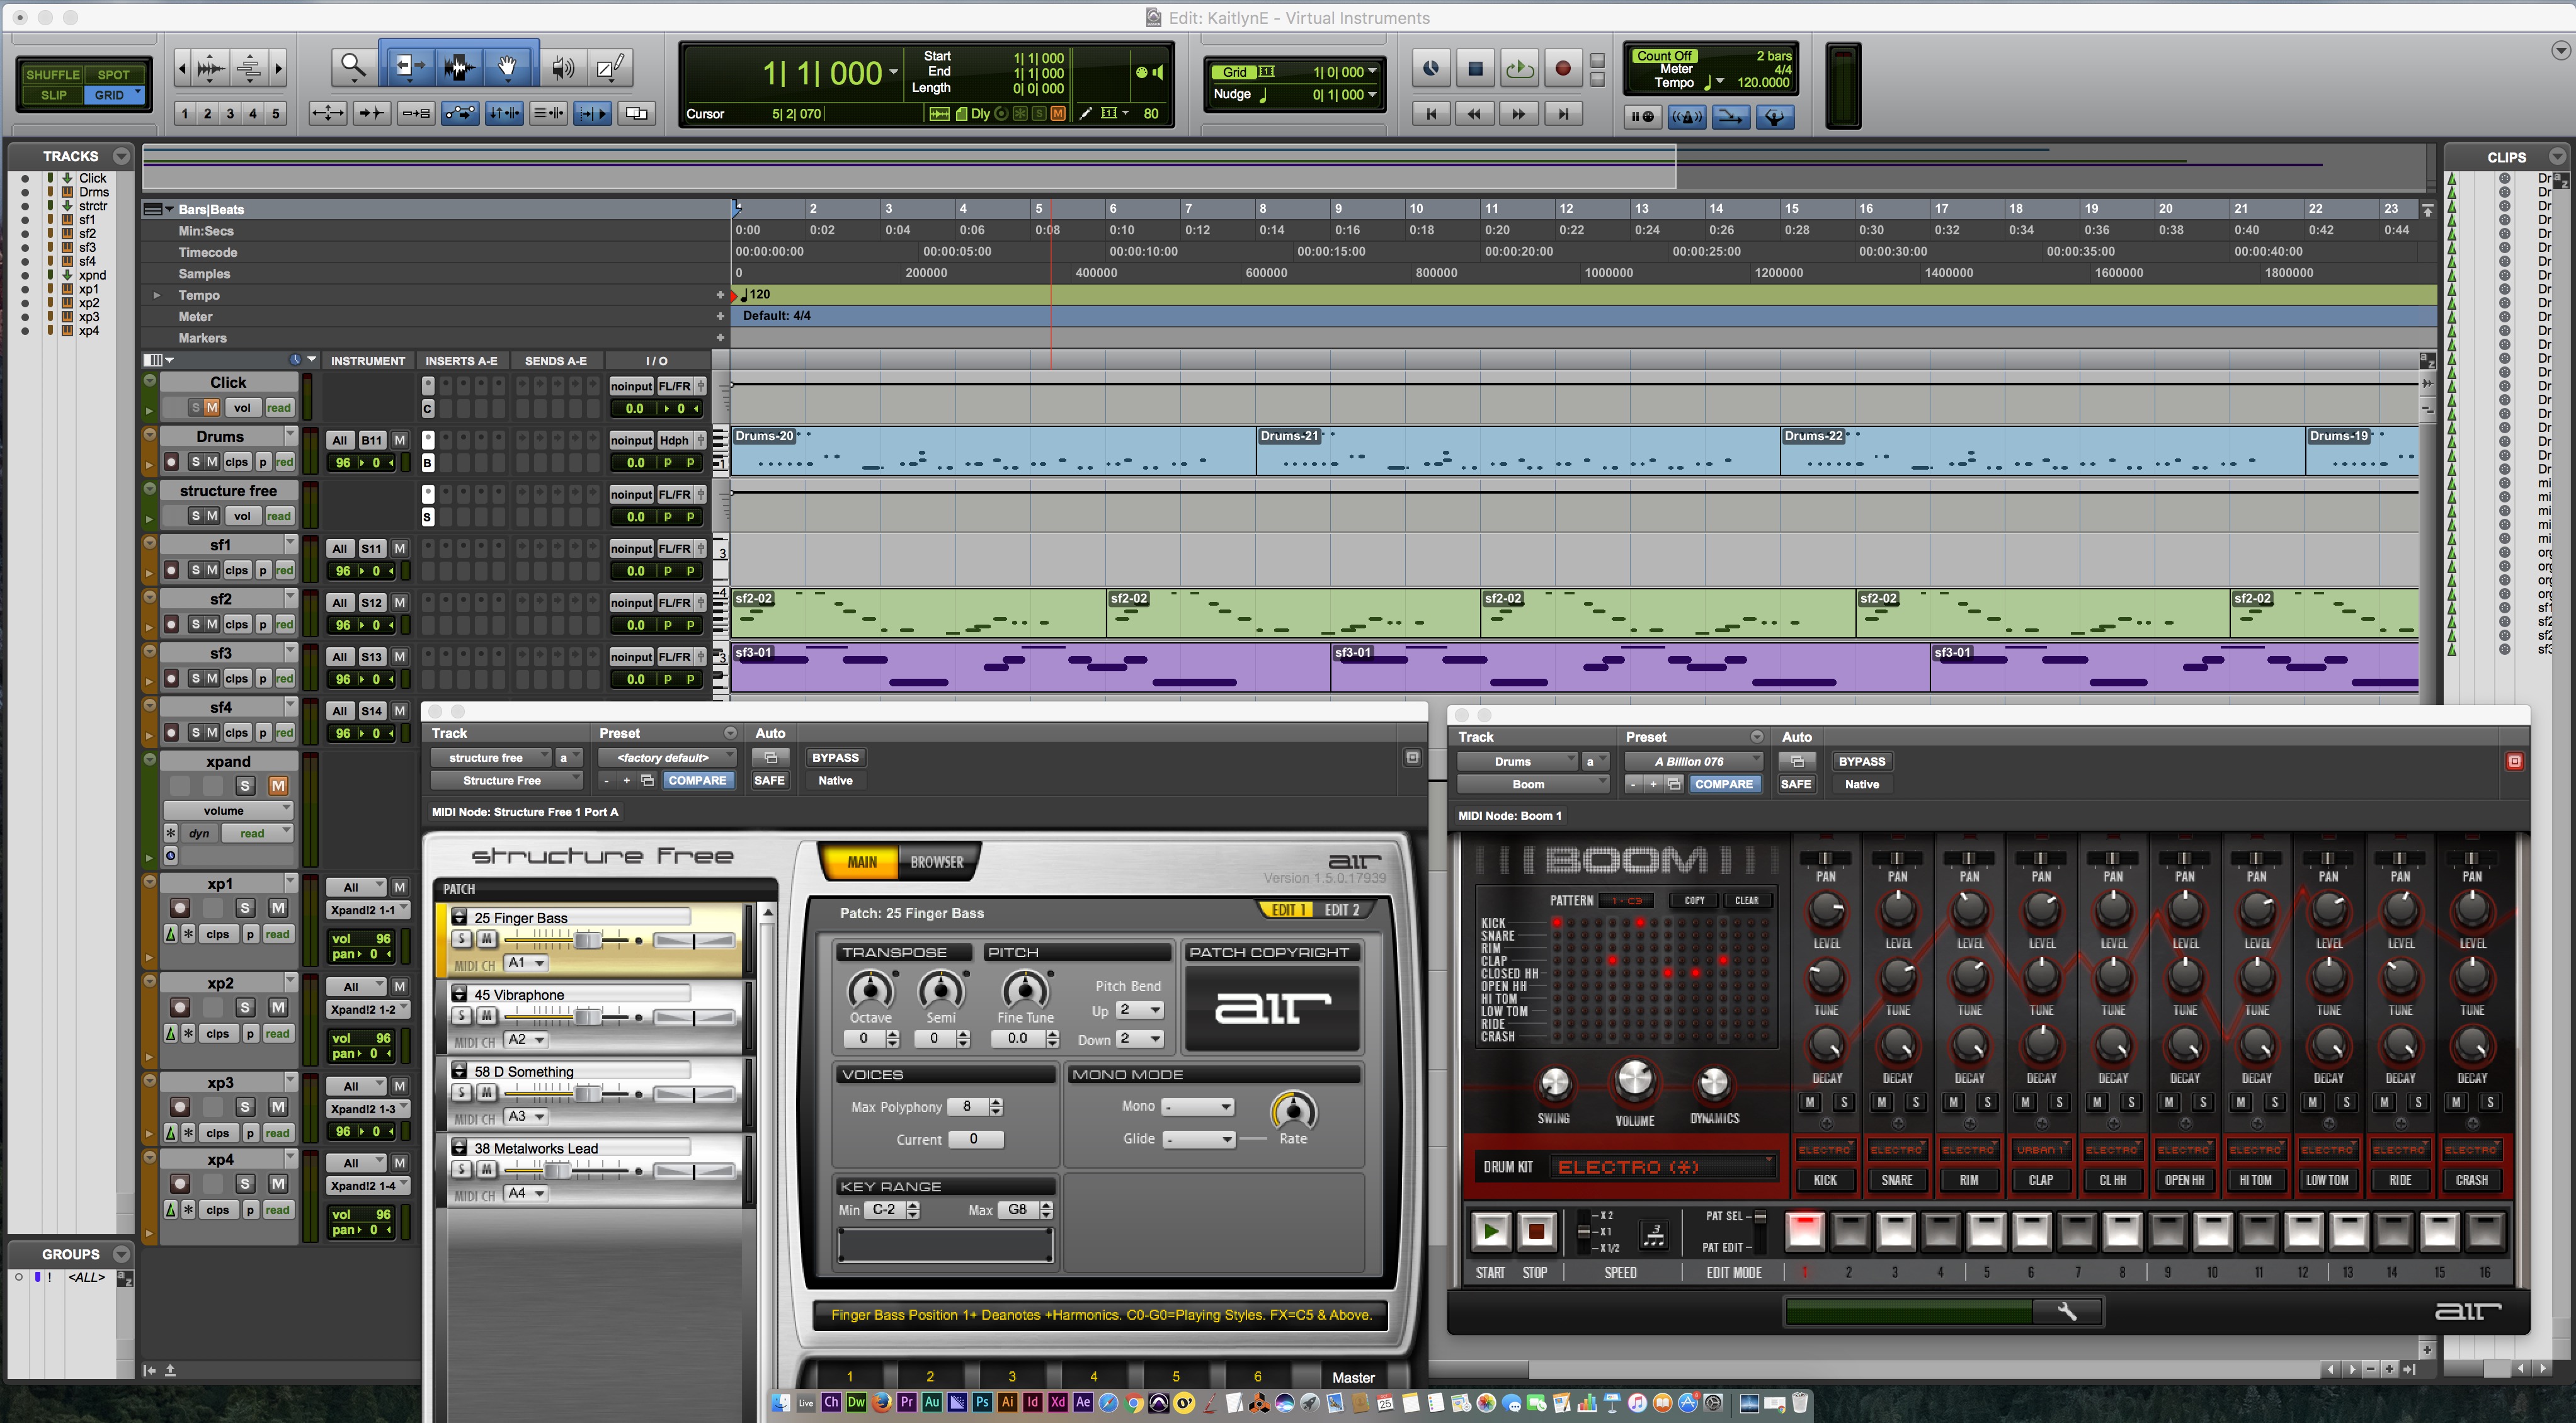 This is a screenshot of Pro Tools which I used to produce my experimental music.